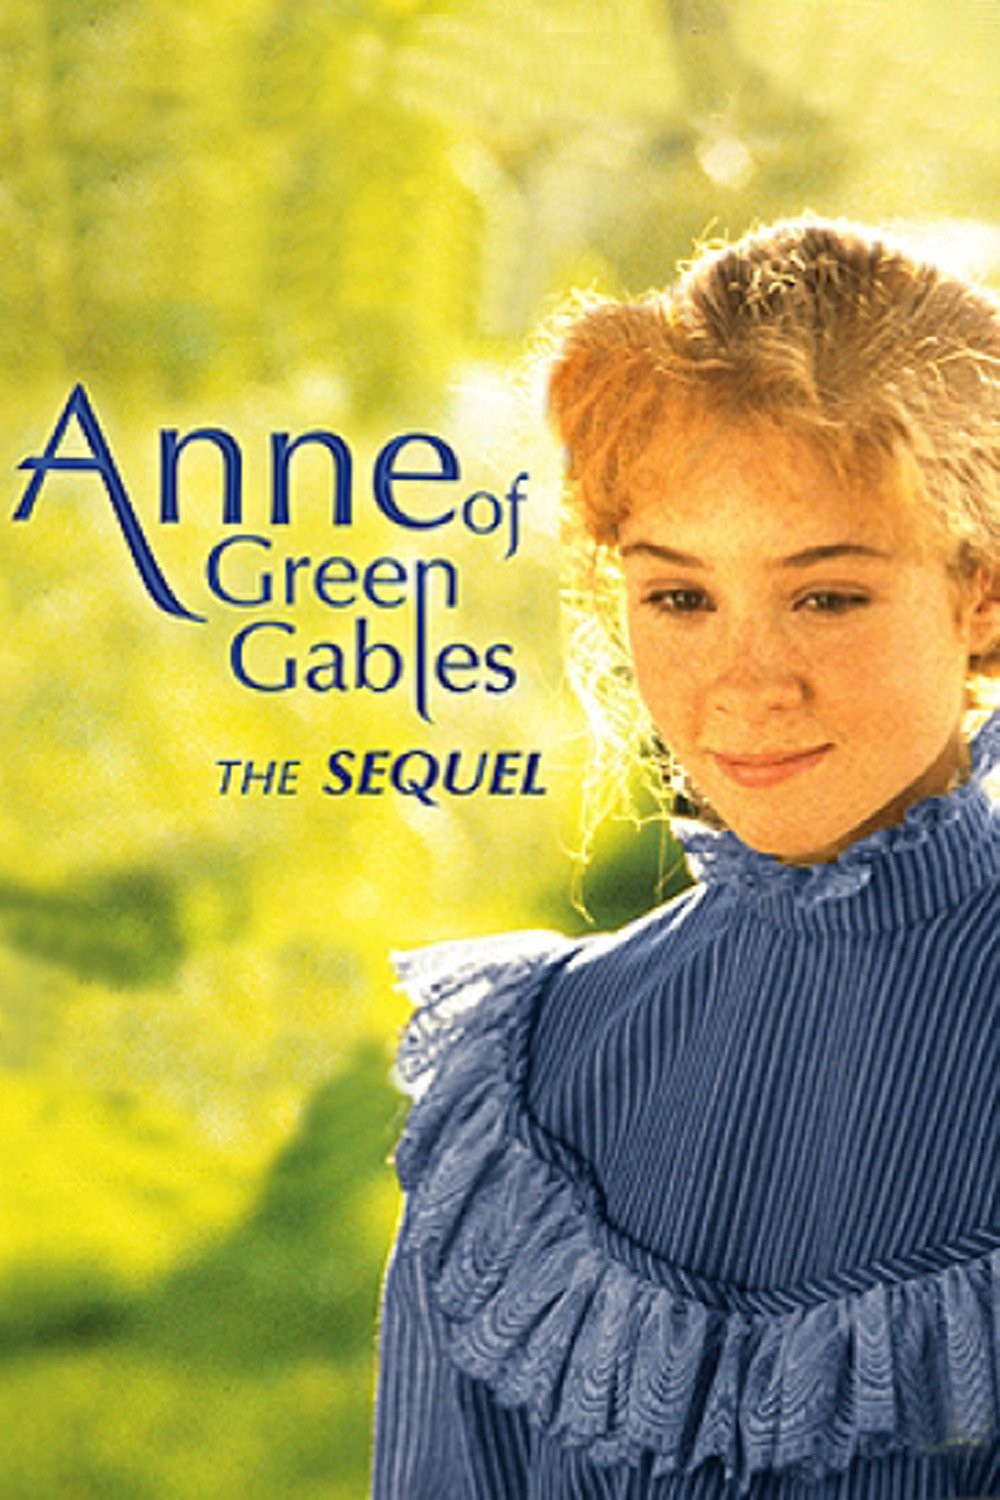 anne of green gables streaming online